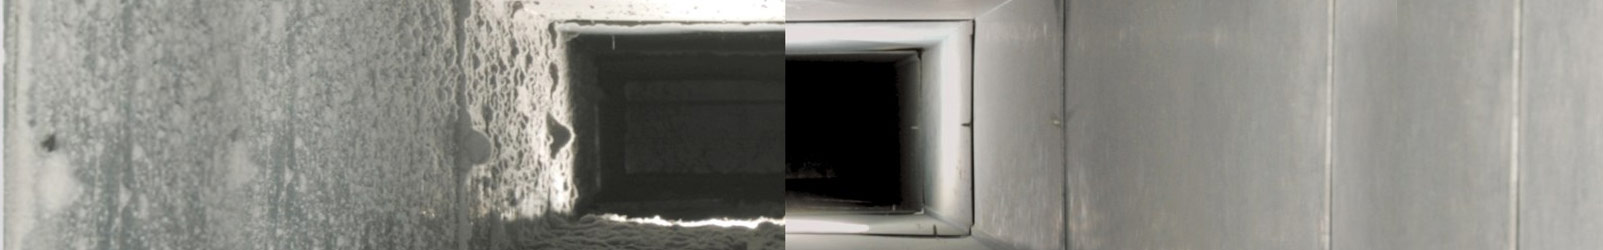 Air Duct before and after being cleaned